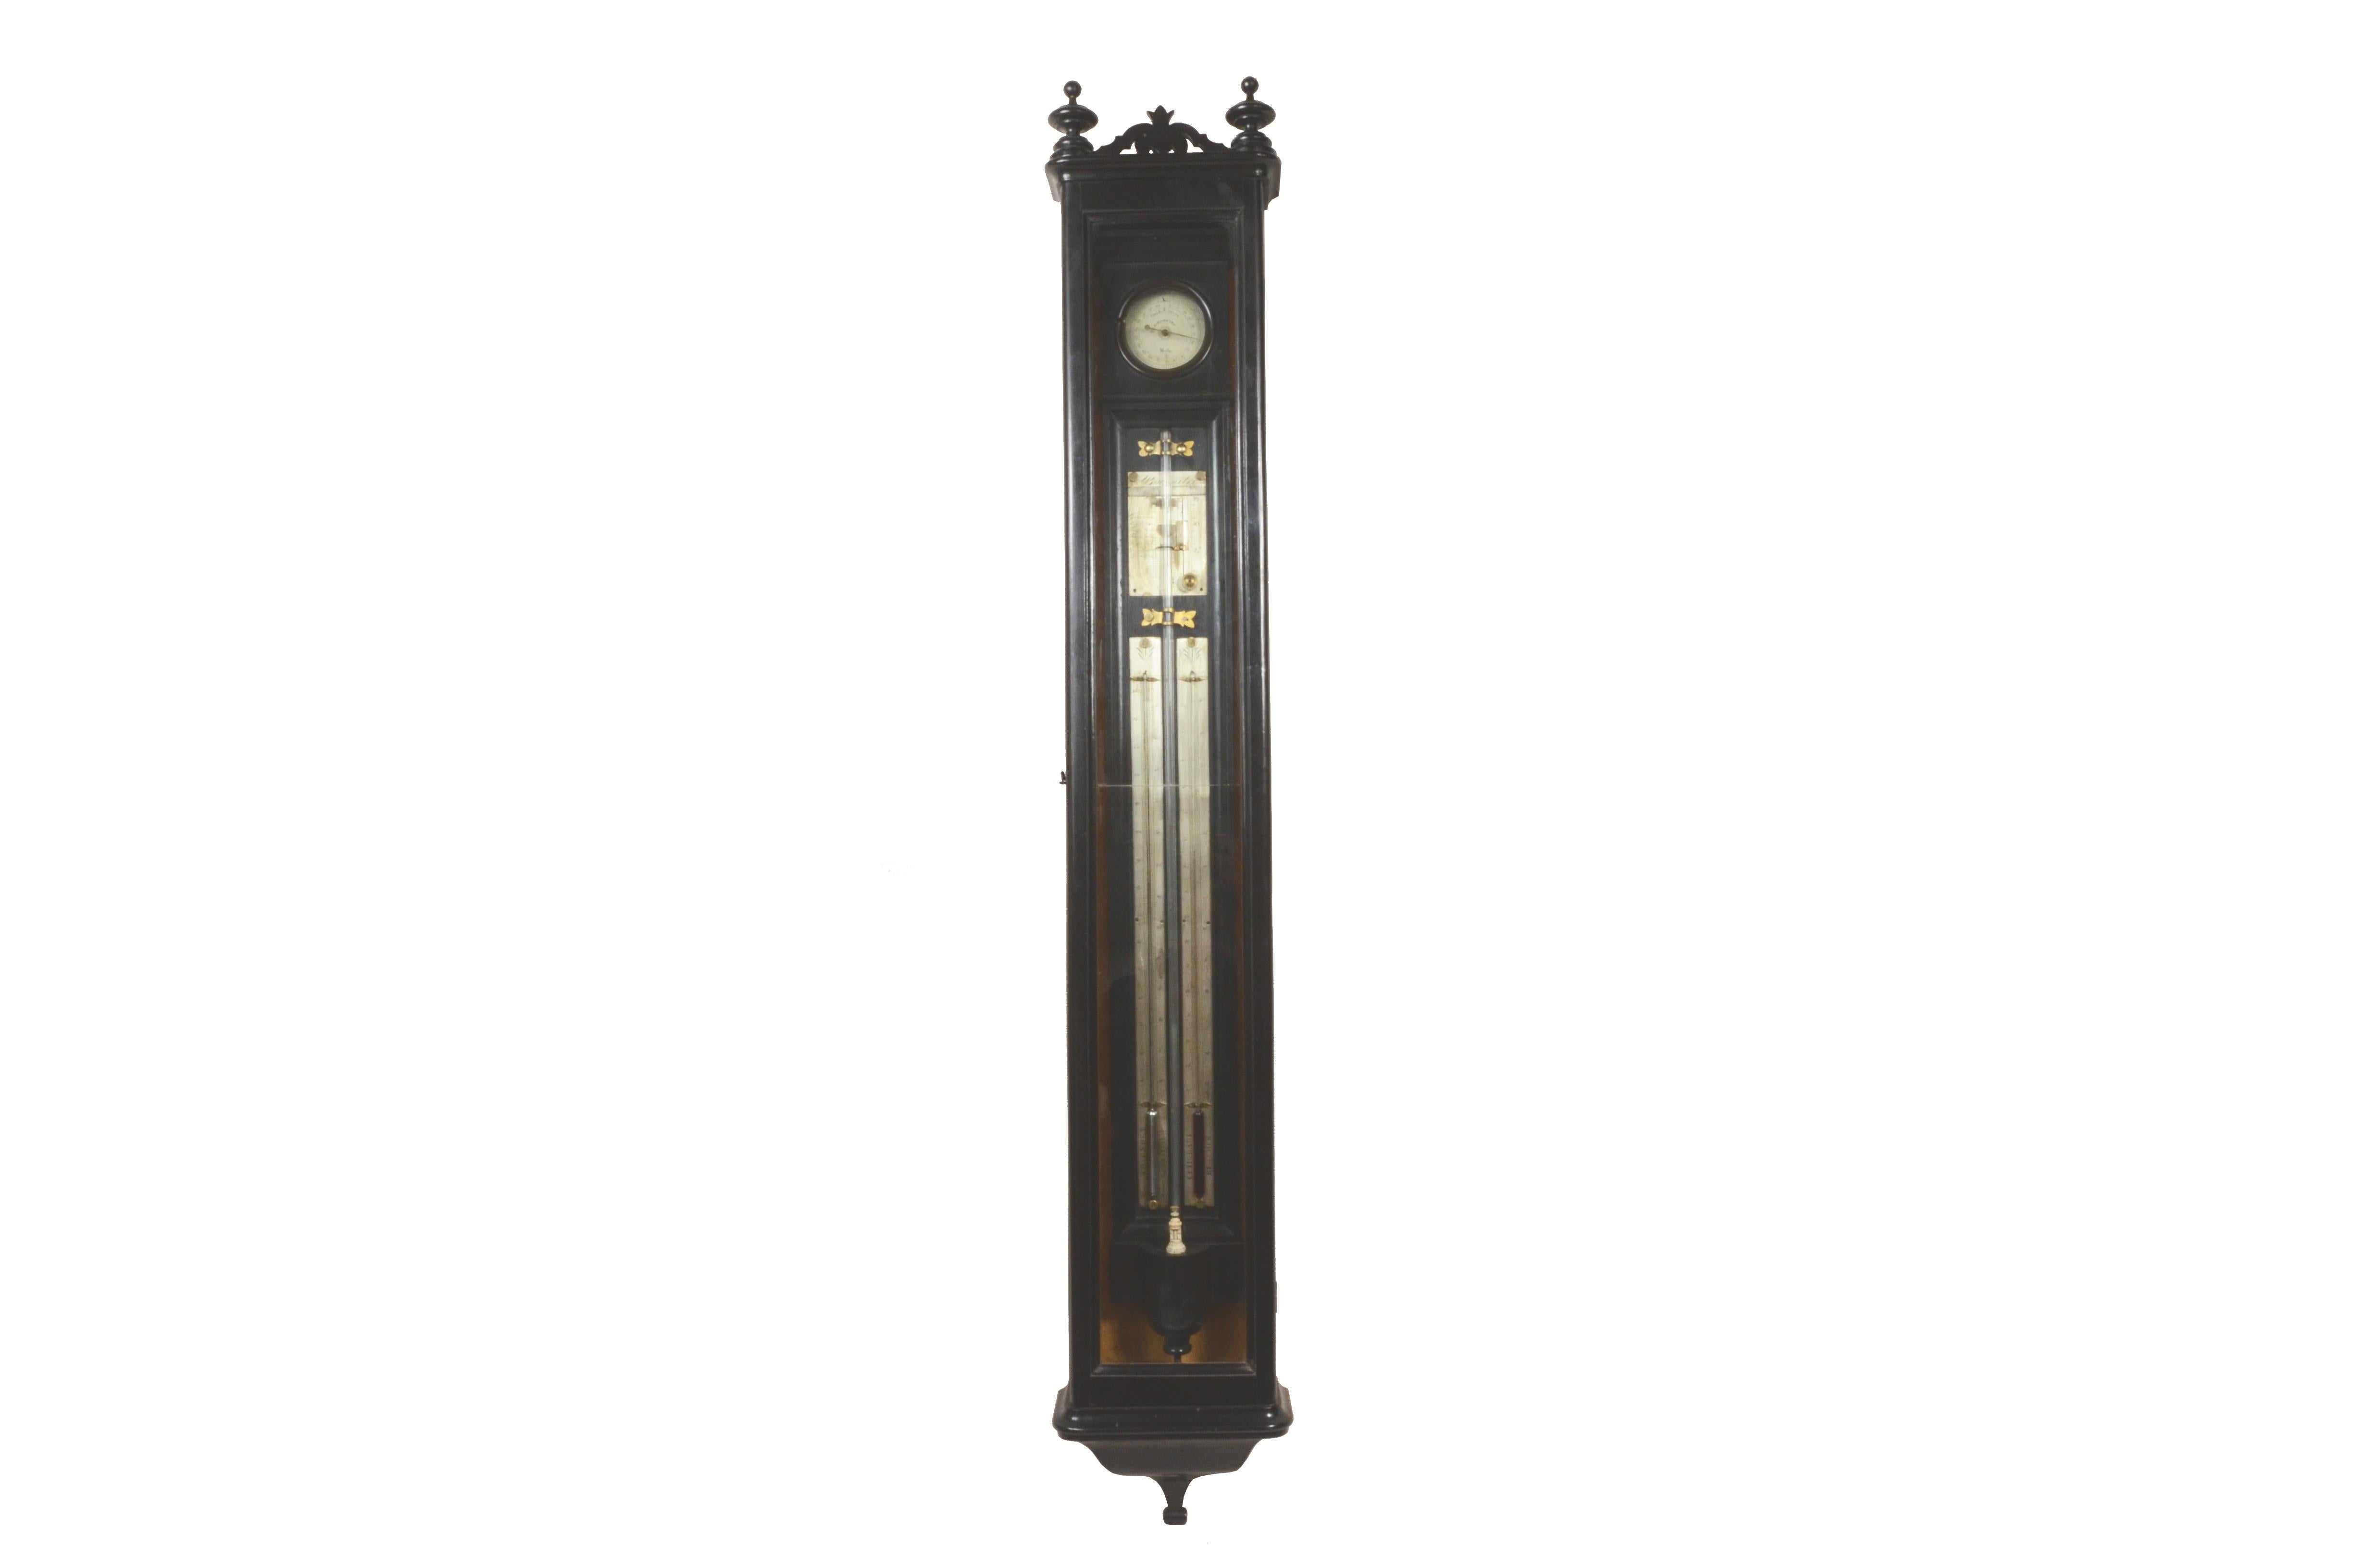 Ebonized wood cue barometer,  manufacturing in northern Italy  from the early 19th century, housed in an elegant custom-made shrine  glass and ebonized wood with decorative motifs.
Barometer with ebonized wooden tank complete with  sea bone float